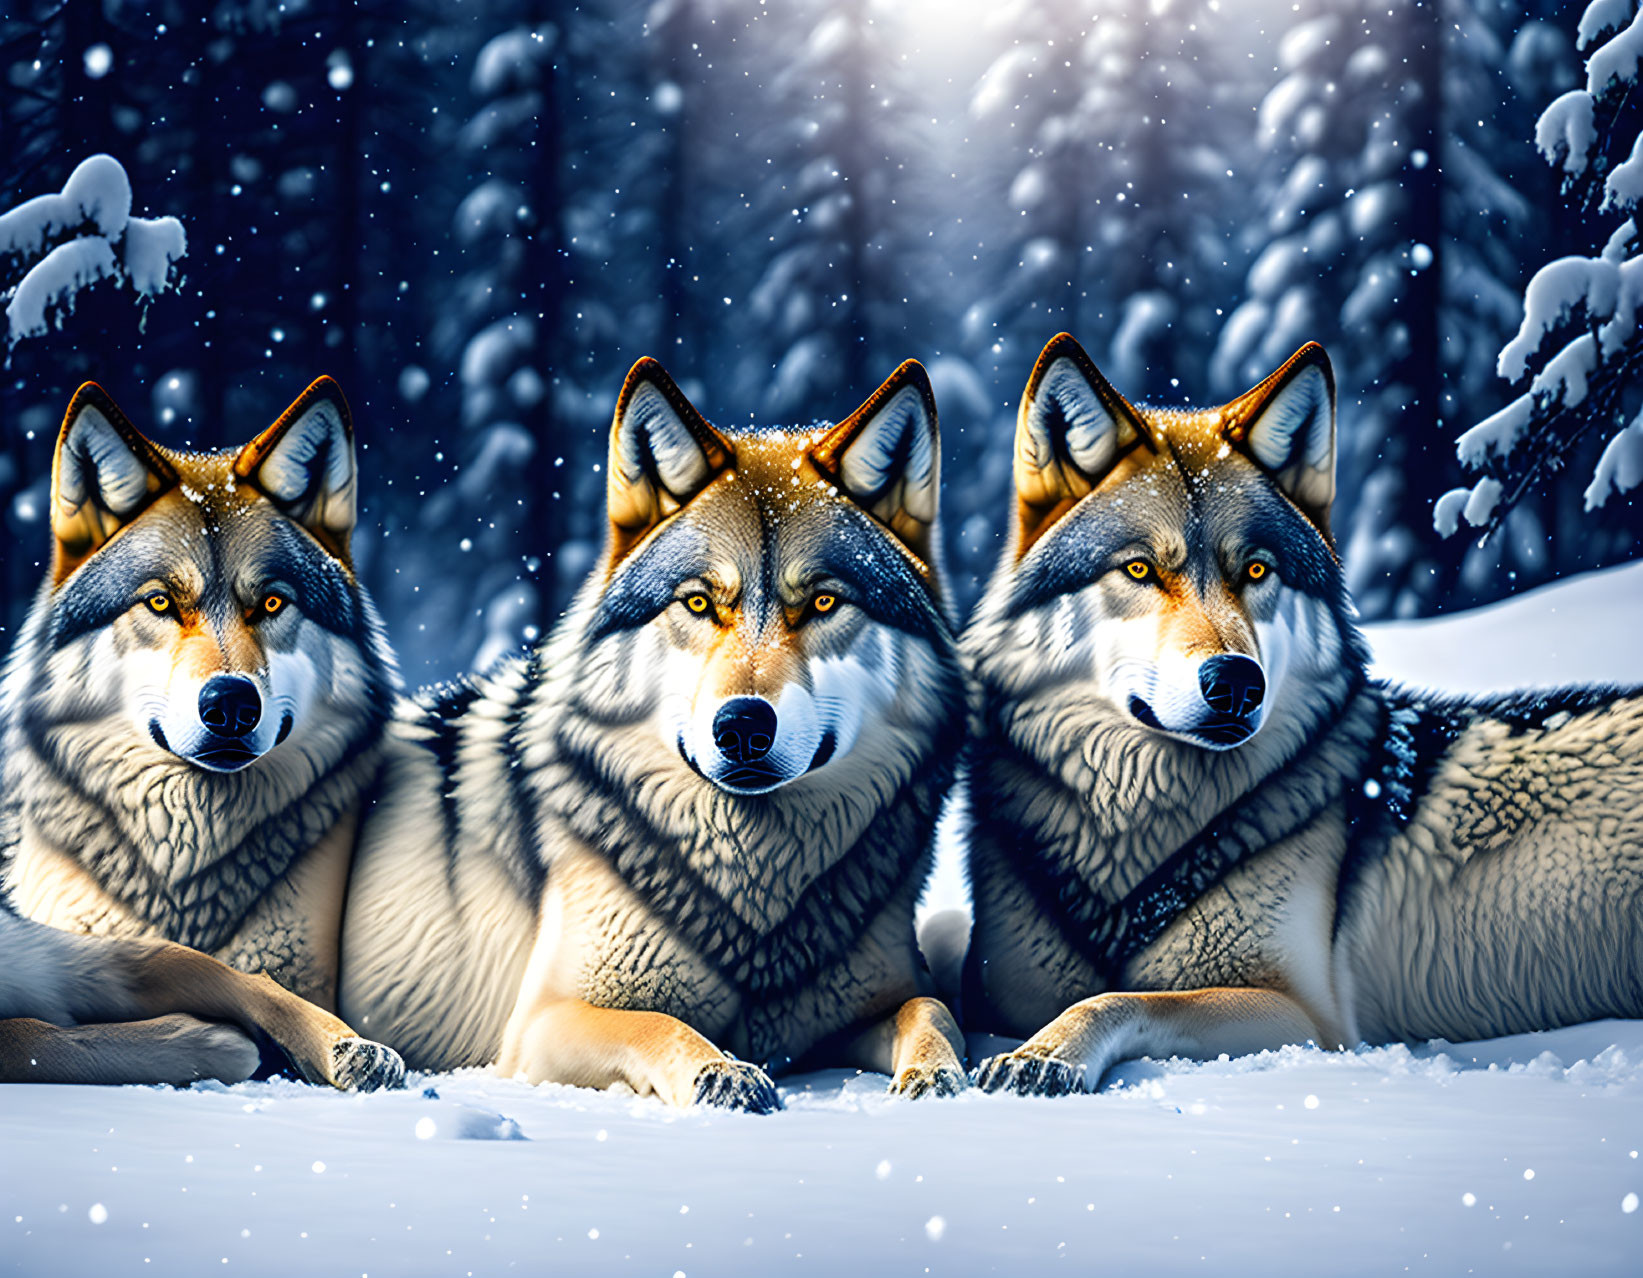 Three wolves in snowy forest with falling snowflakes